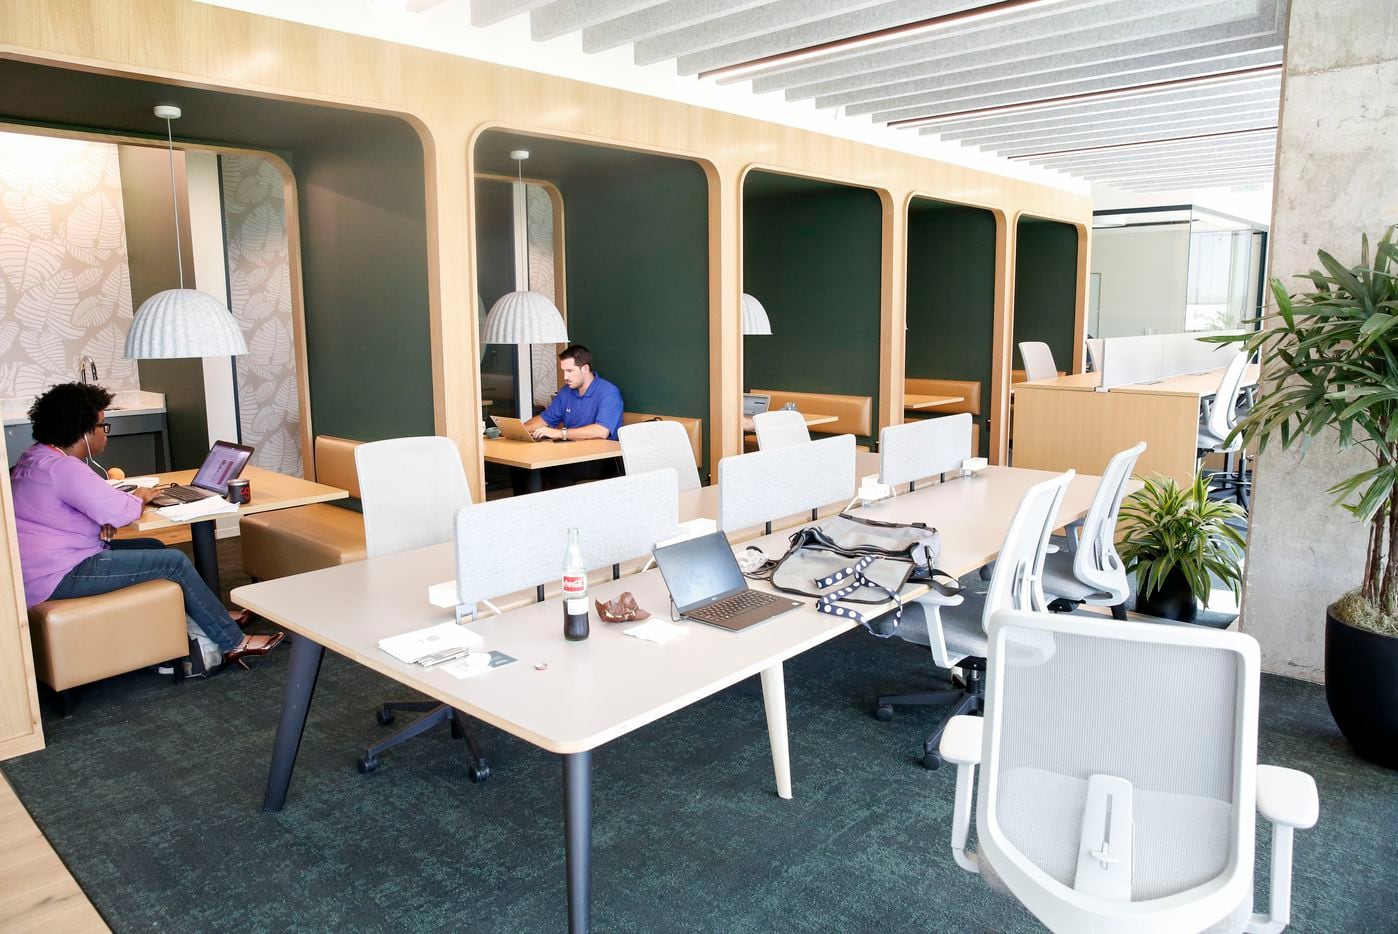 Some of the many different styles of coworking spaces at Hana.